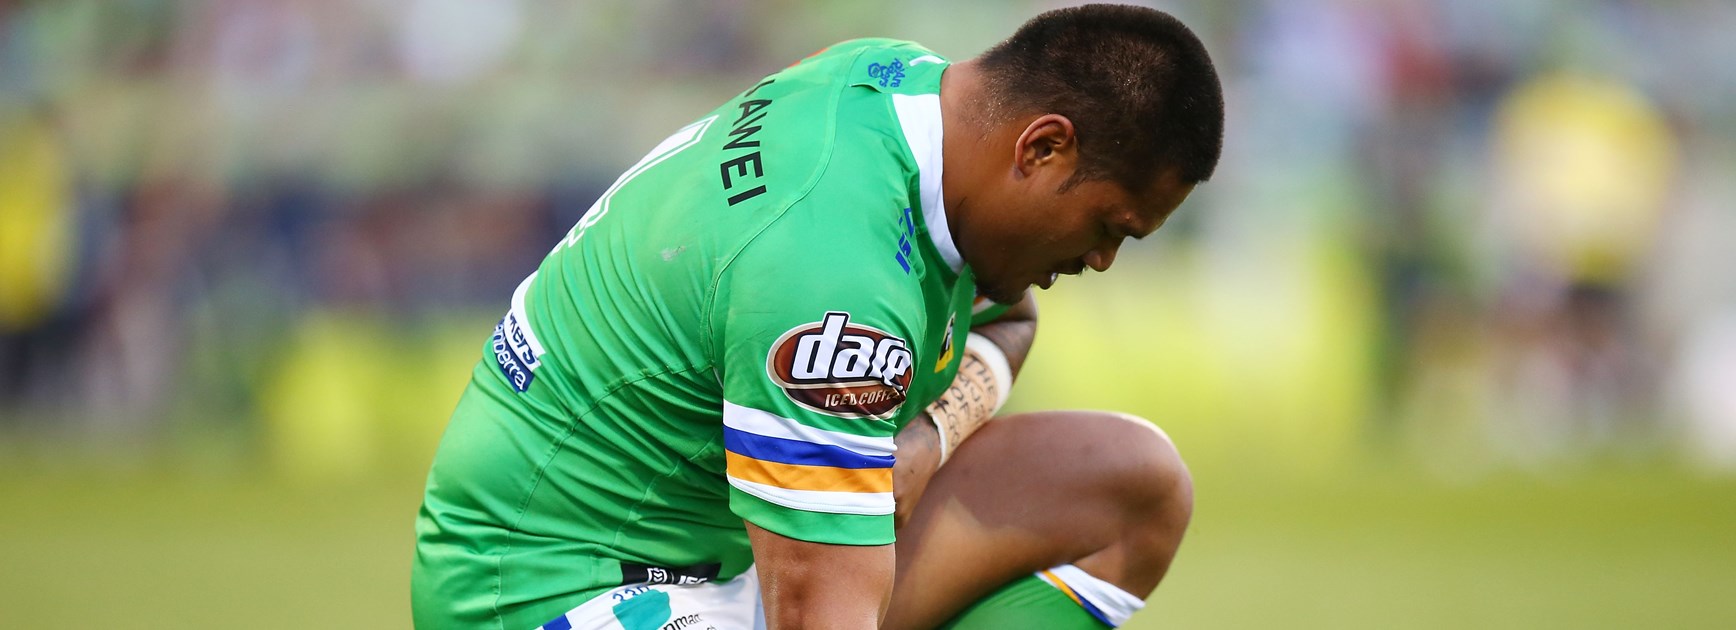 Neck surgery likely to rule Leilua out for season